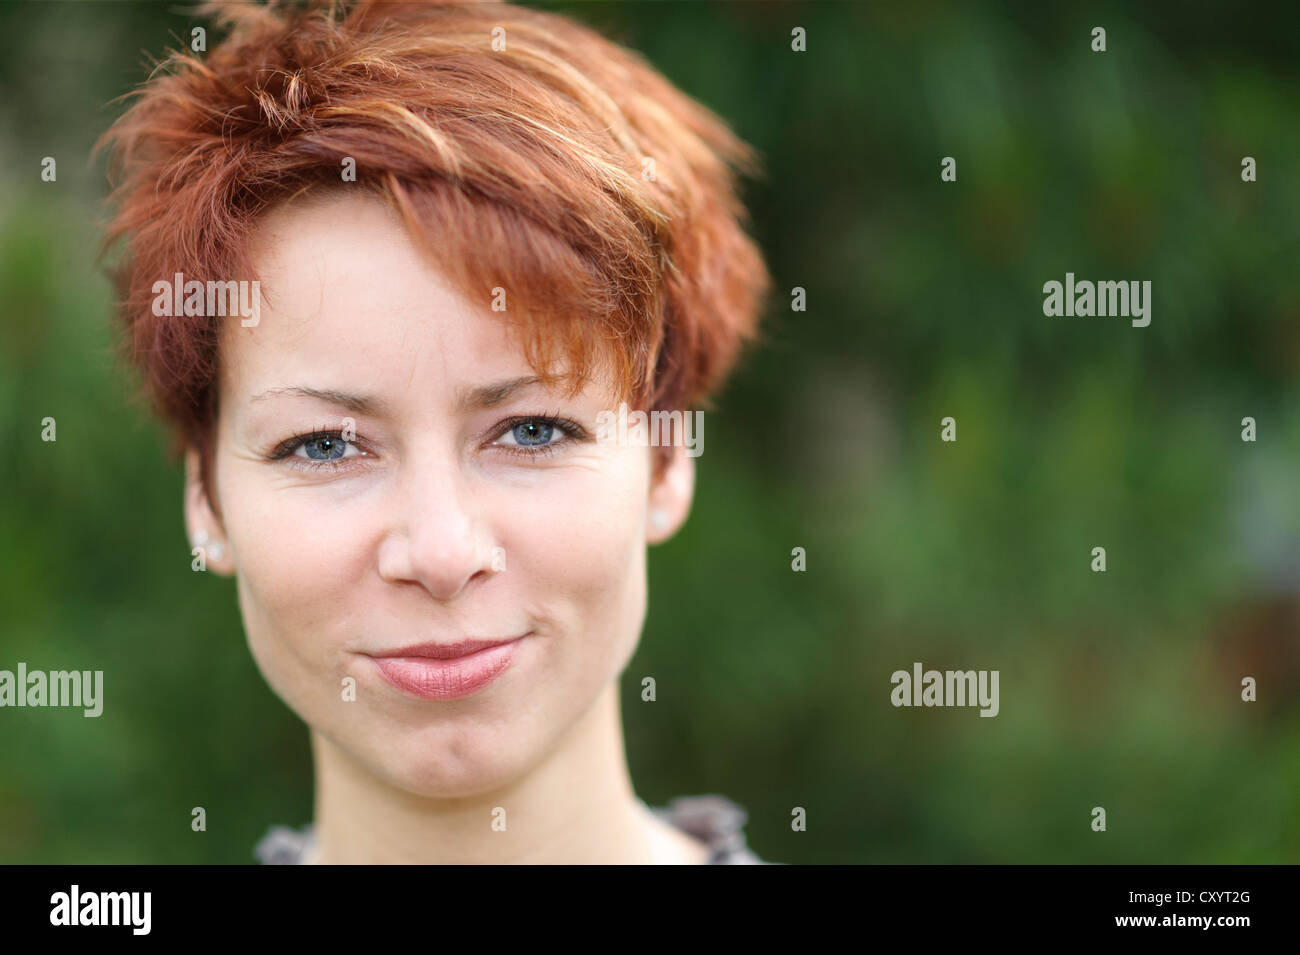 Smiling young woman with short red hair, portrait Stock Photo